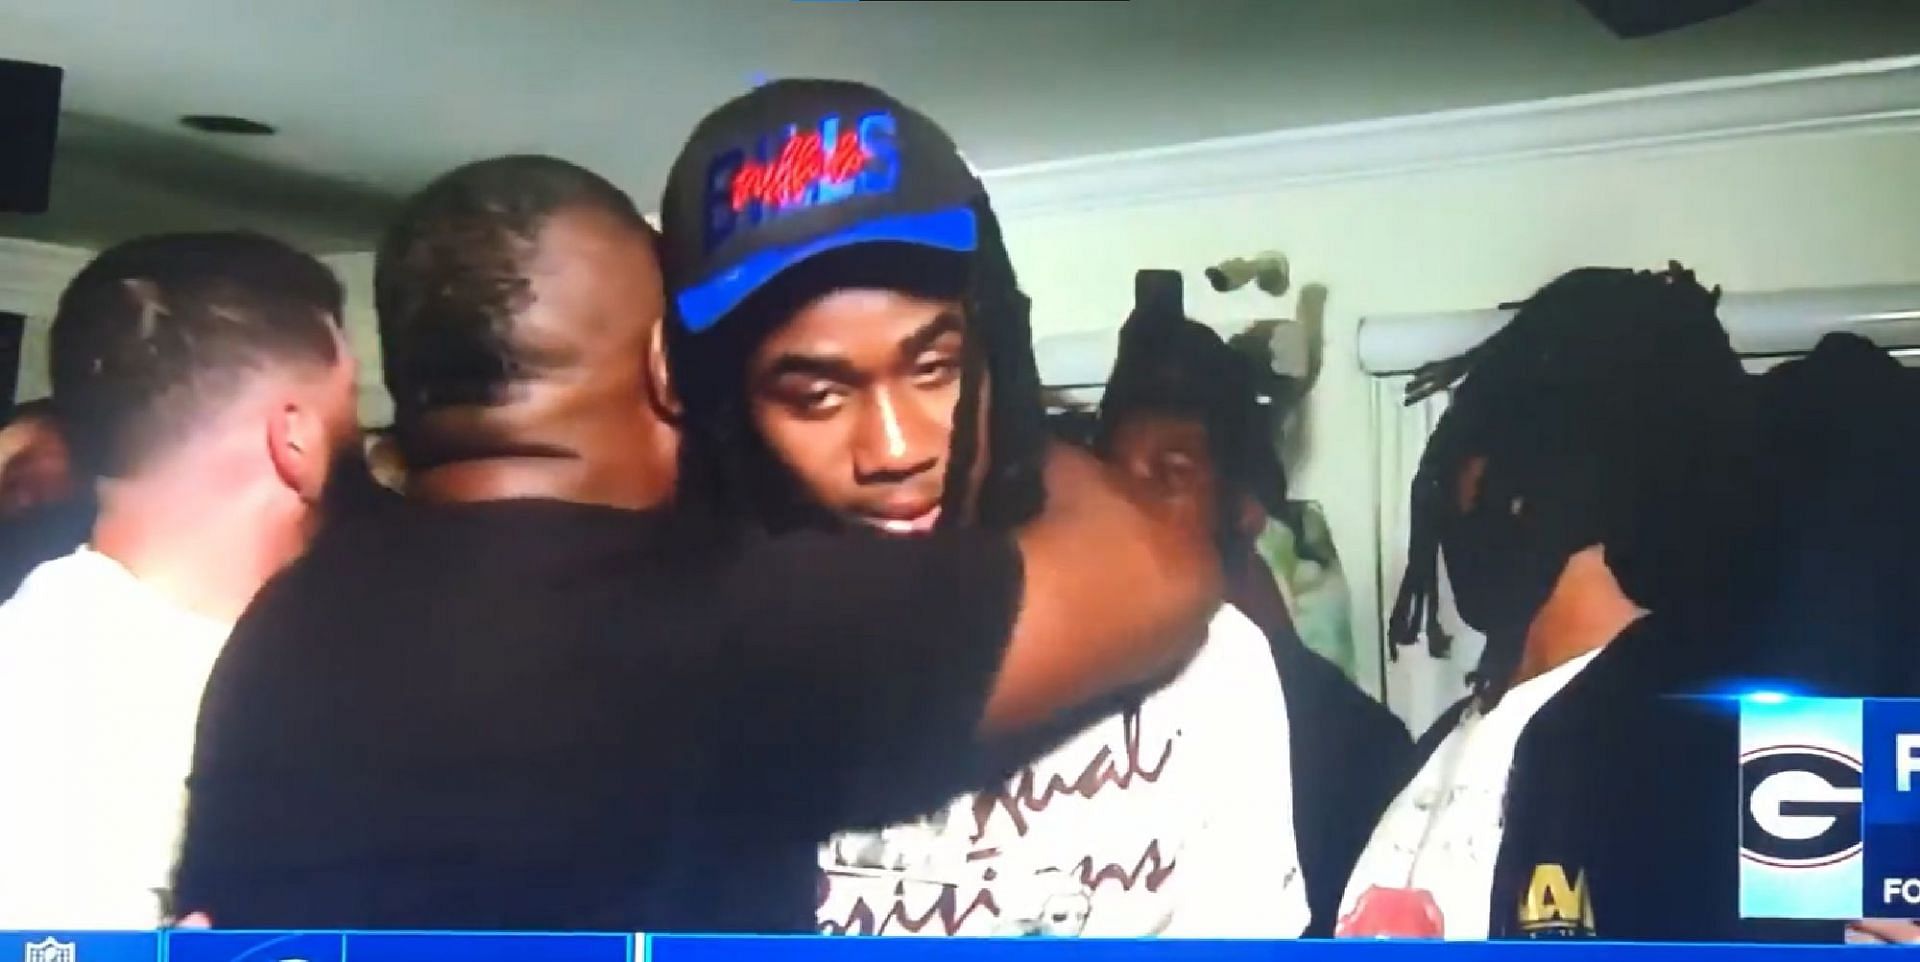 WATCH: James Cook looks devastated after being drafted by Buffalo Bills